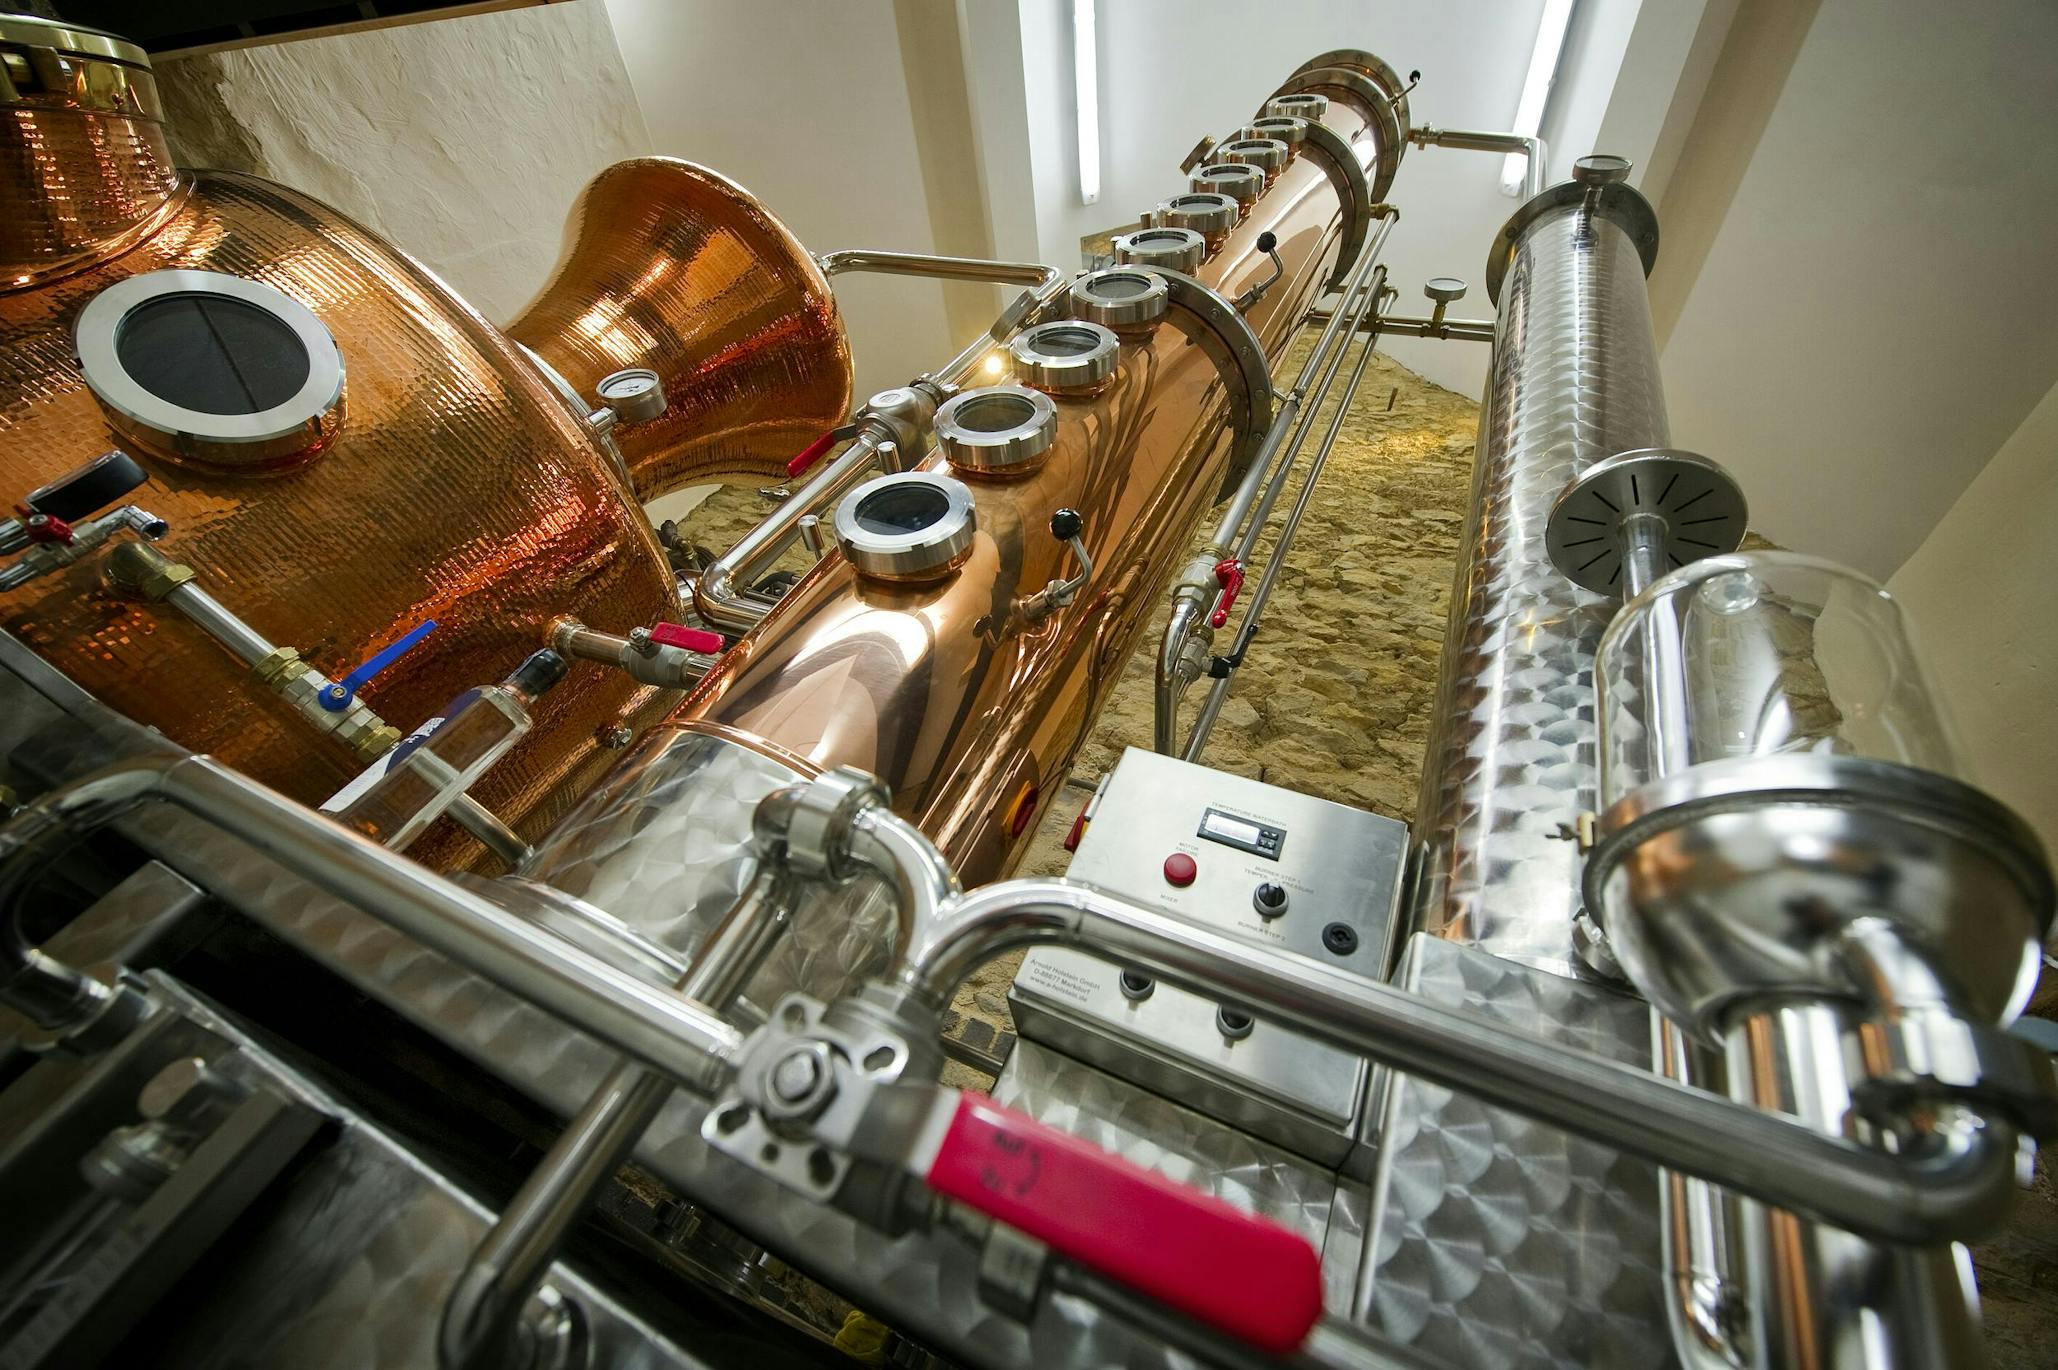 SMALL DUTIES FOR SMALL DISTILLERS - LET’S SUPPORT UK SPIRITS!